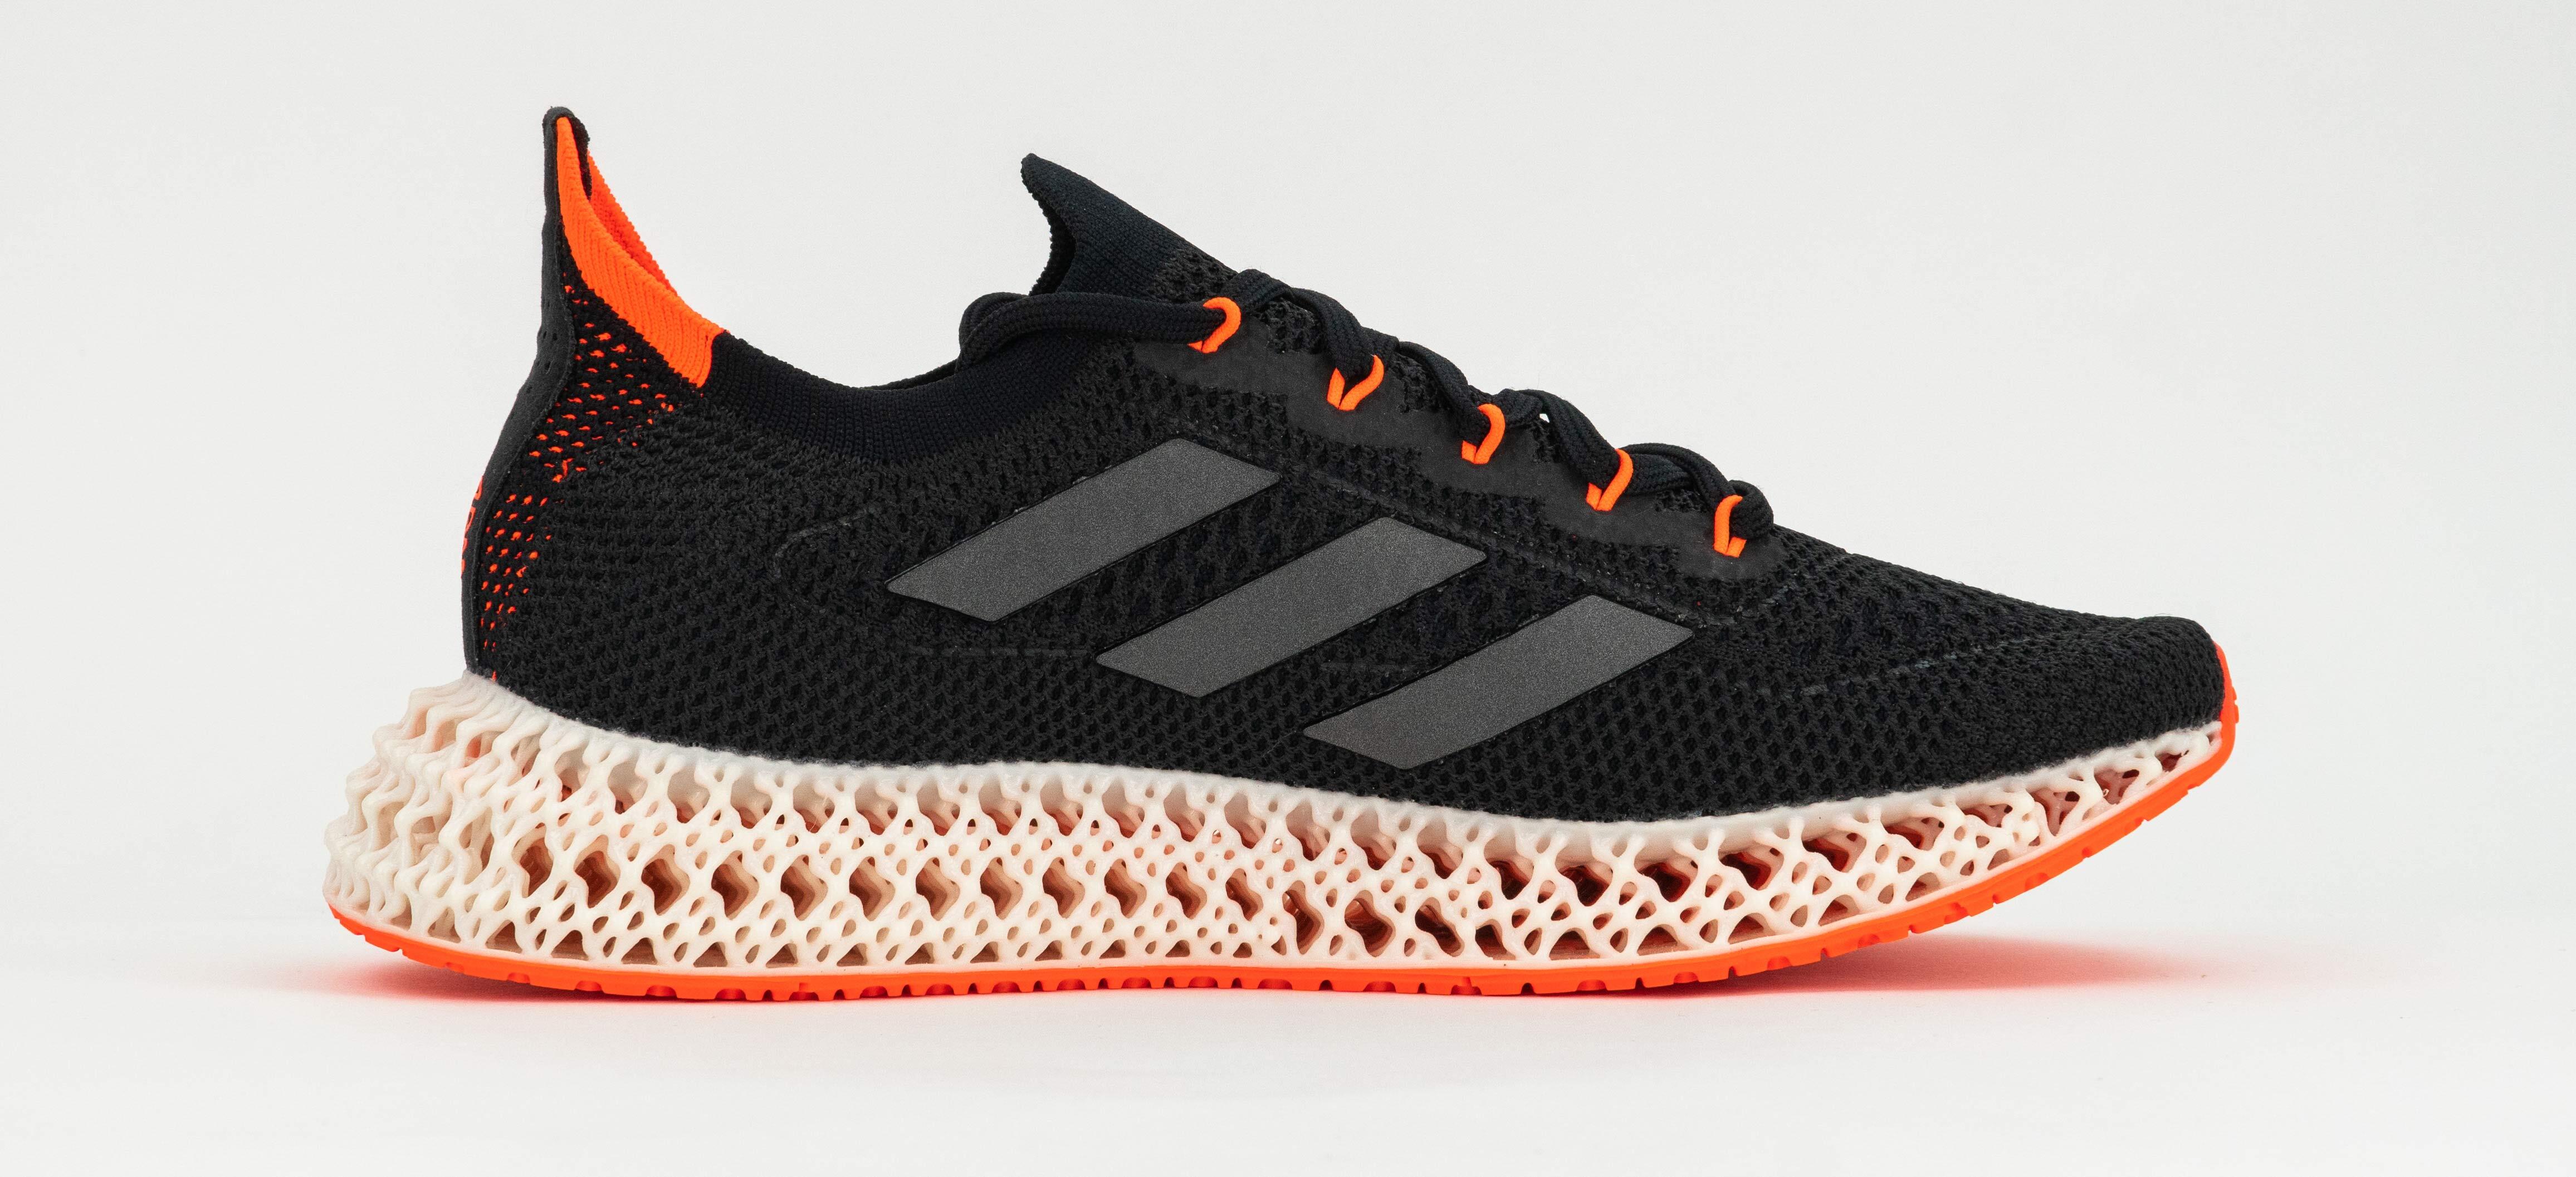 Adidas running shoes with 3D printed midsoles push your feet forward - CNET